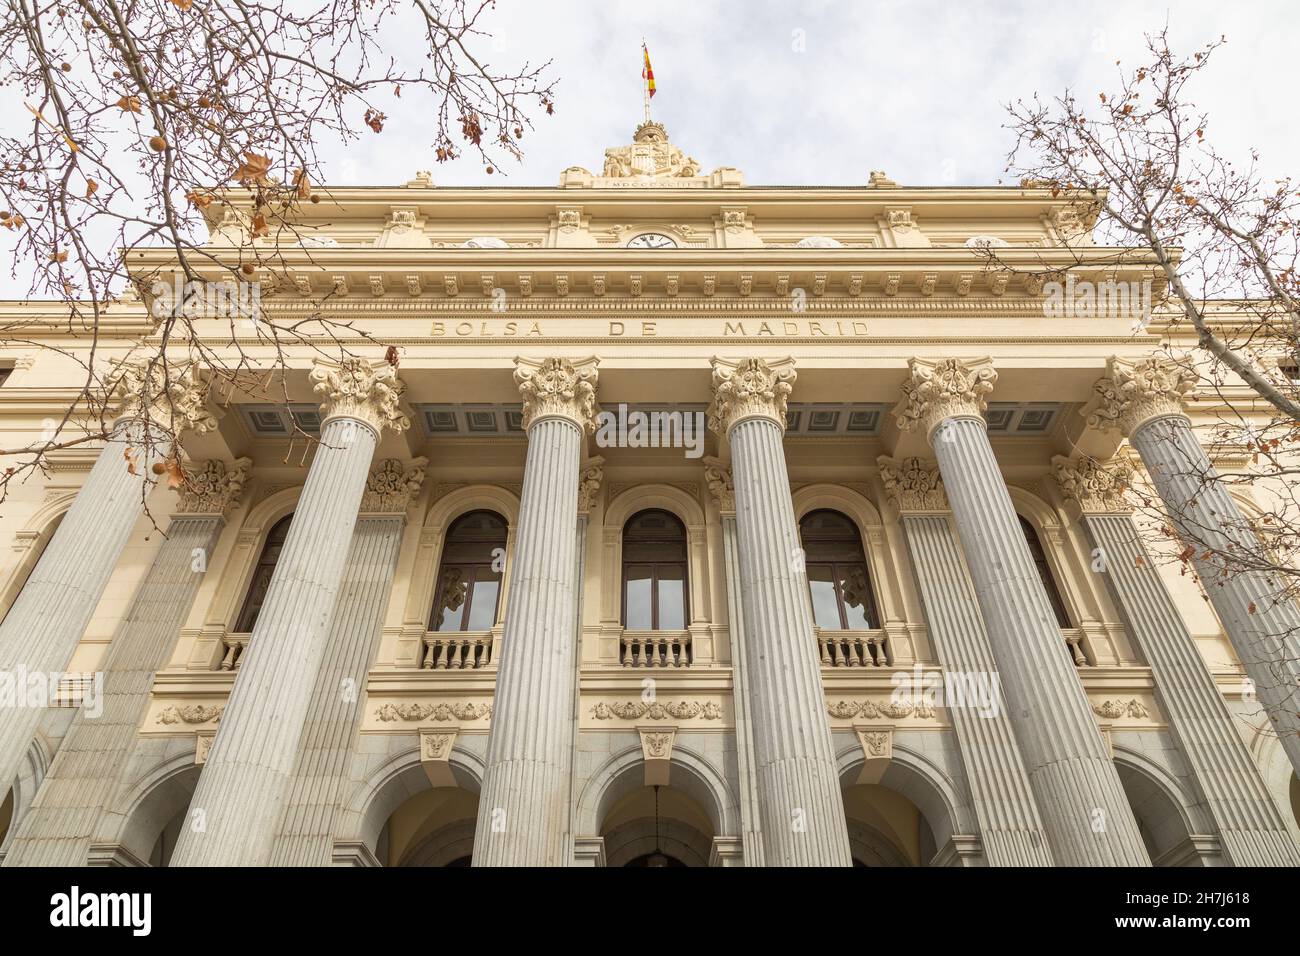 Madrid, Spain - Dec 27, 2020: Access area and facade of the main entrance of the building that houses the Madrid Stock Exchange, with its characterist Stock Photo